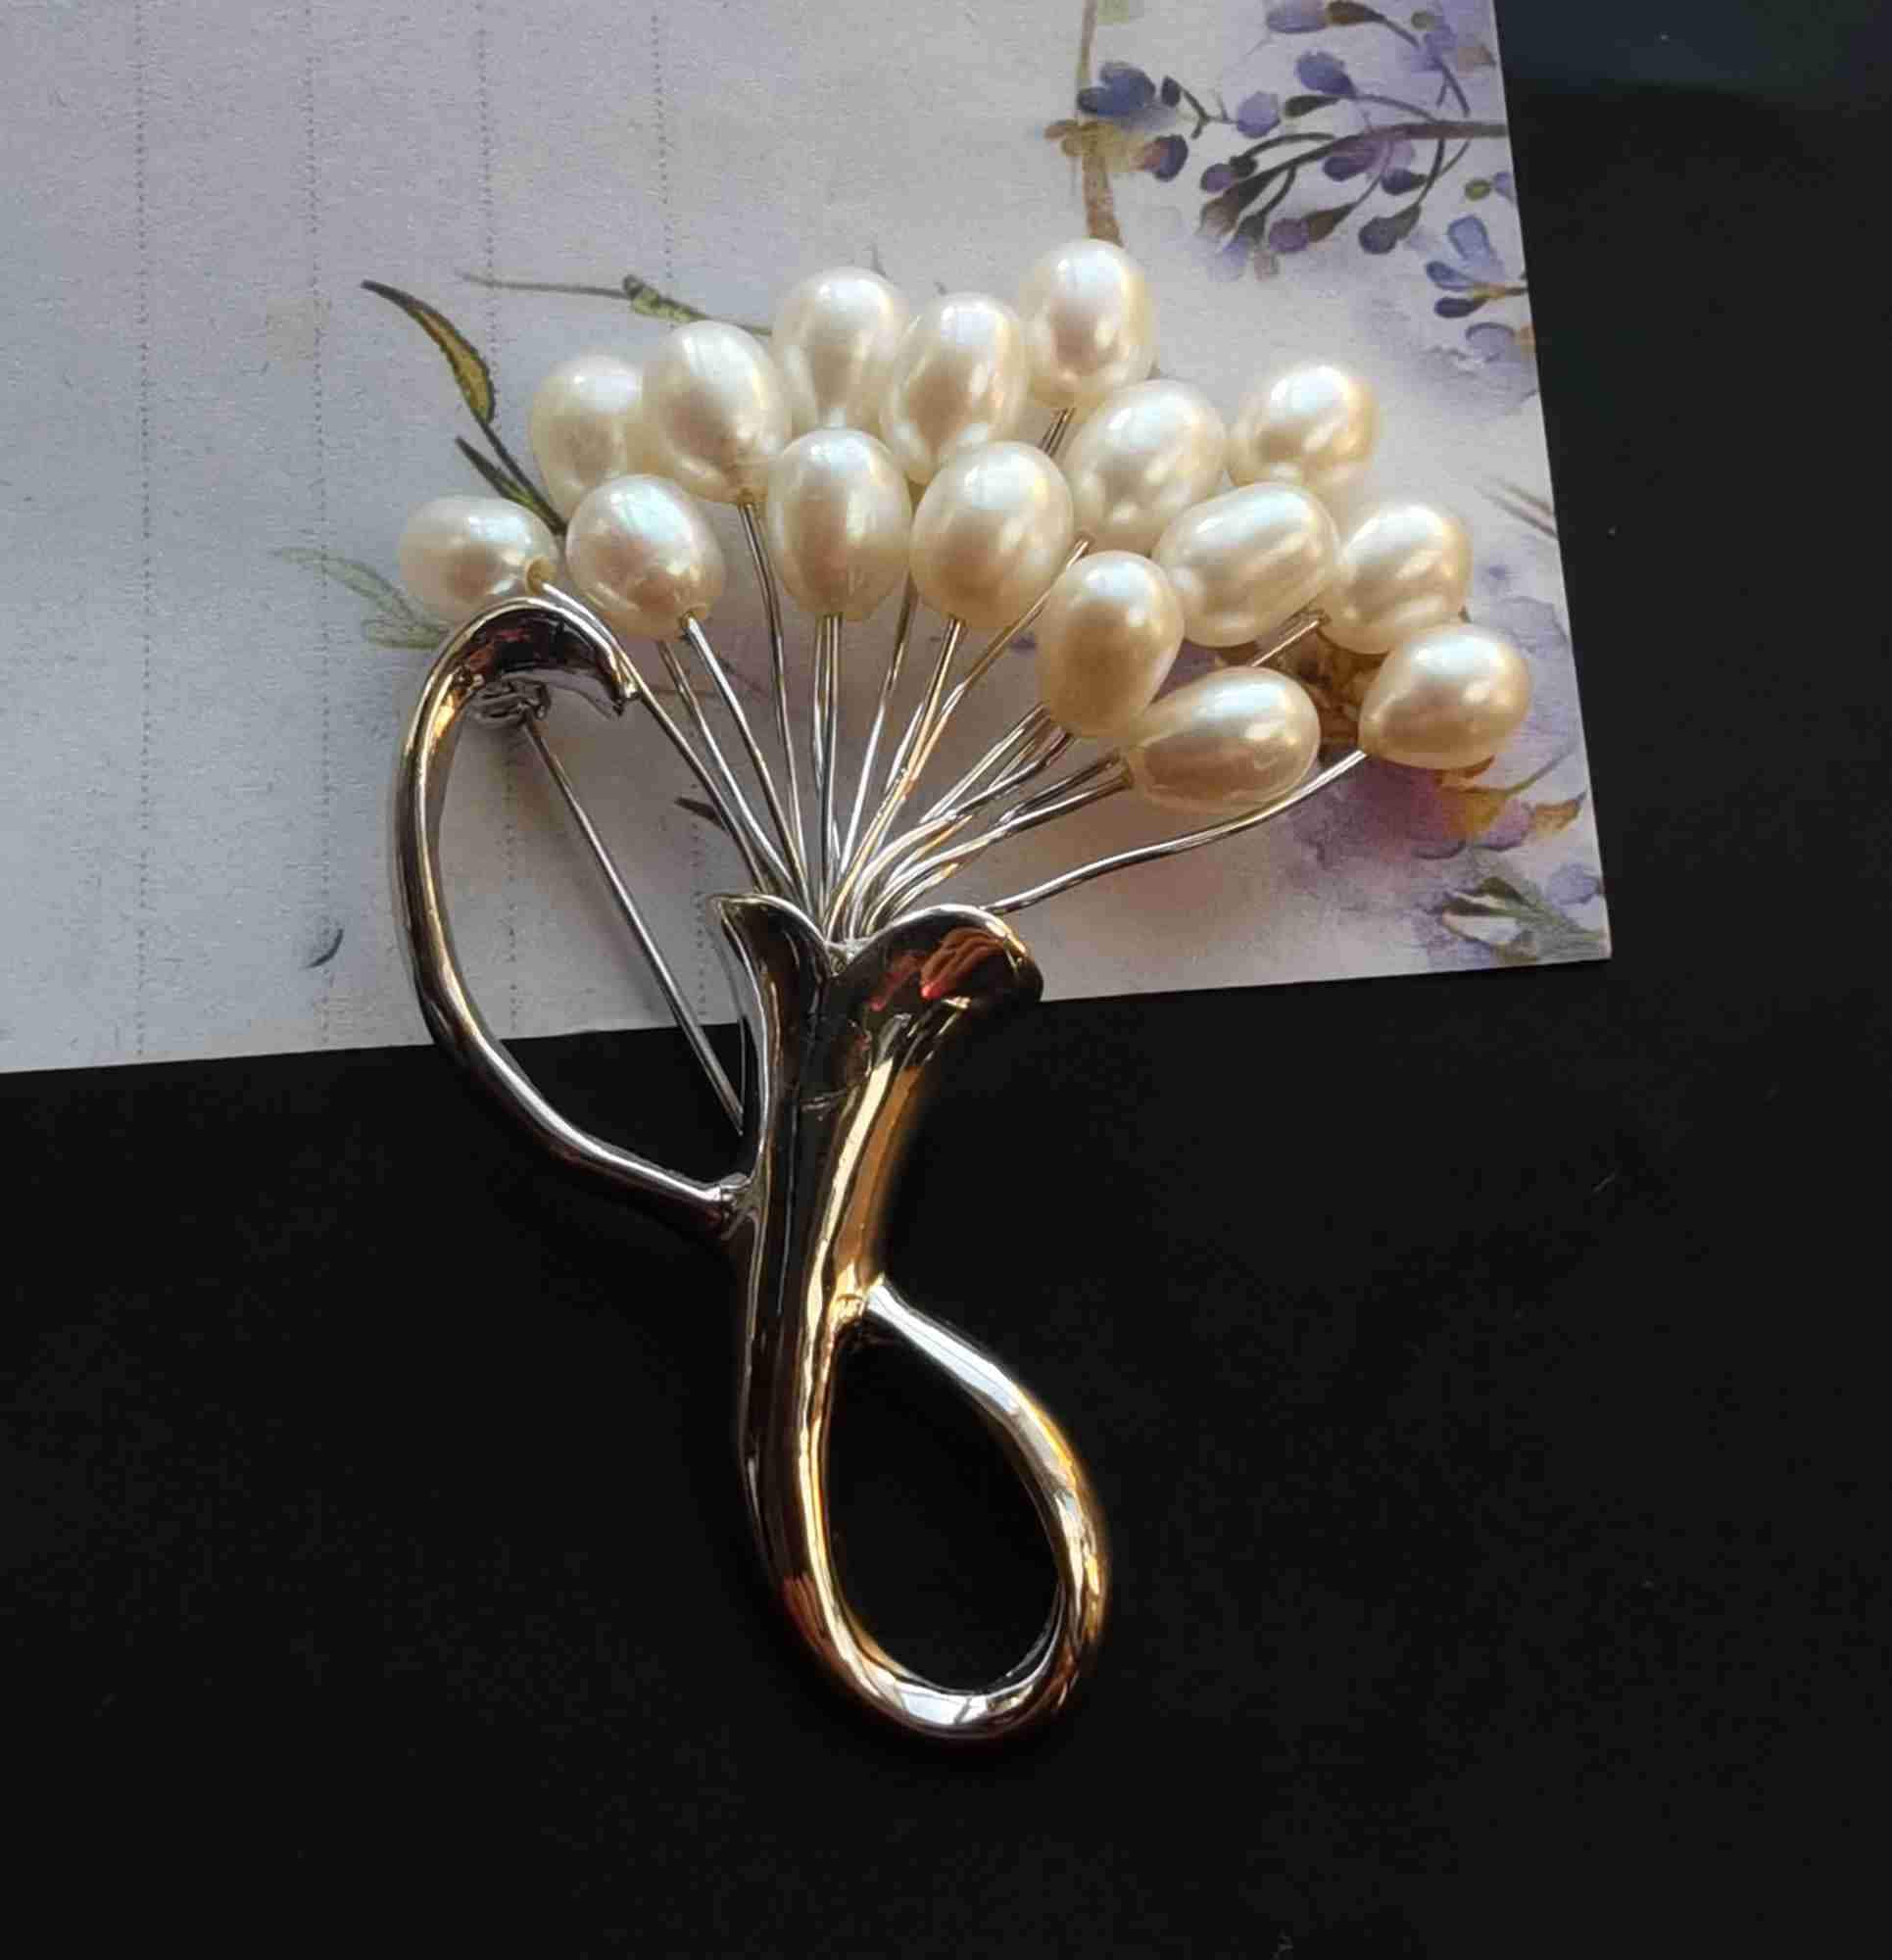 Gold Plated 925 Sterling Silver Butterfly Brooch for Women